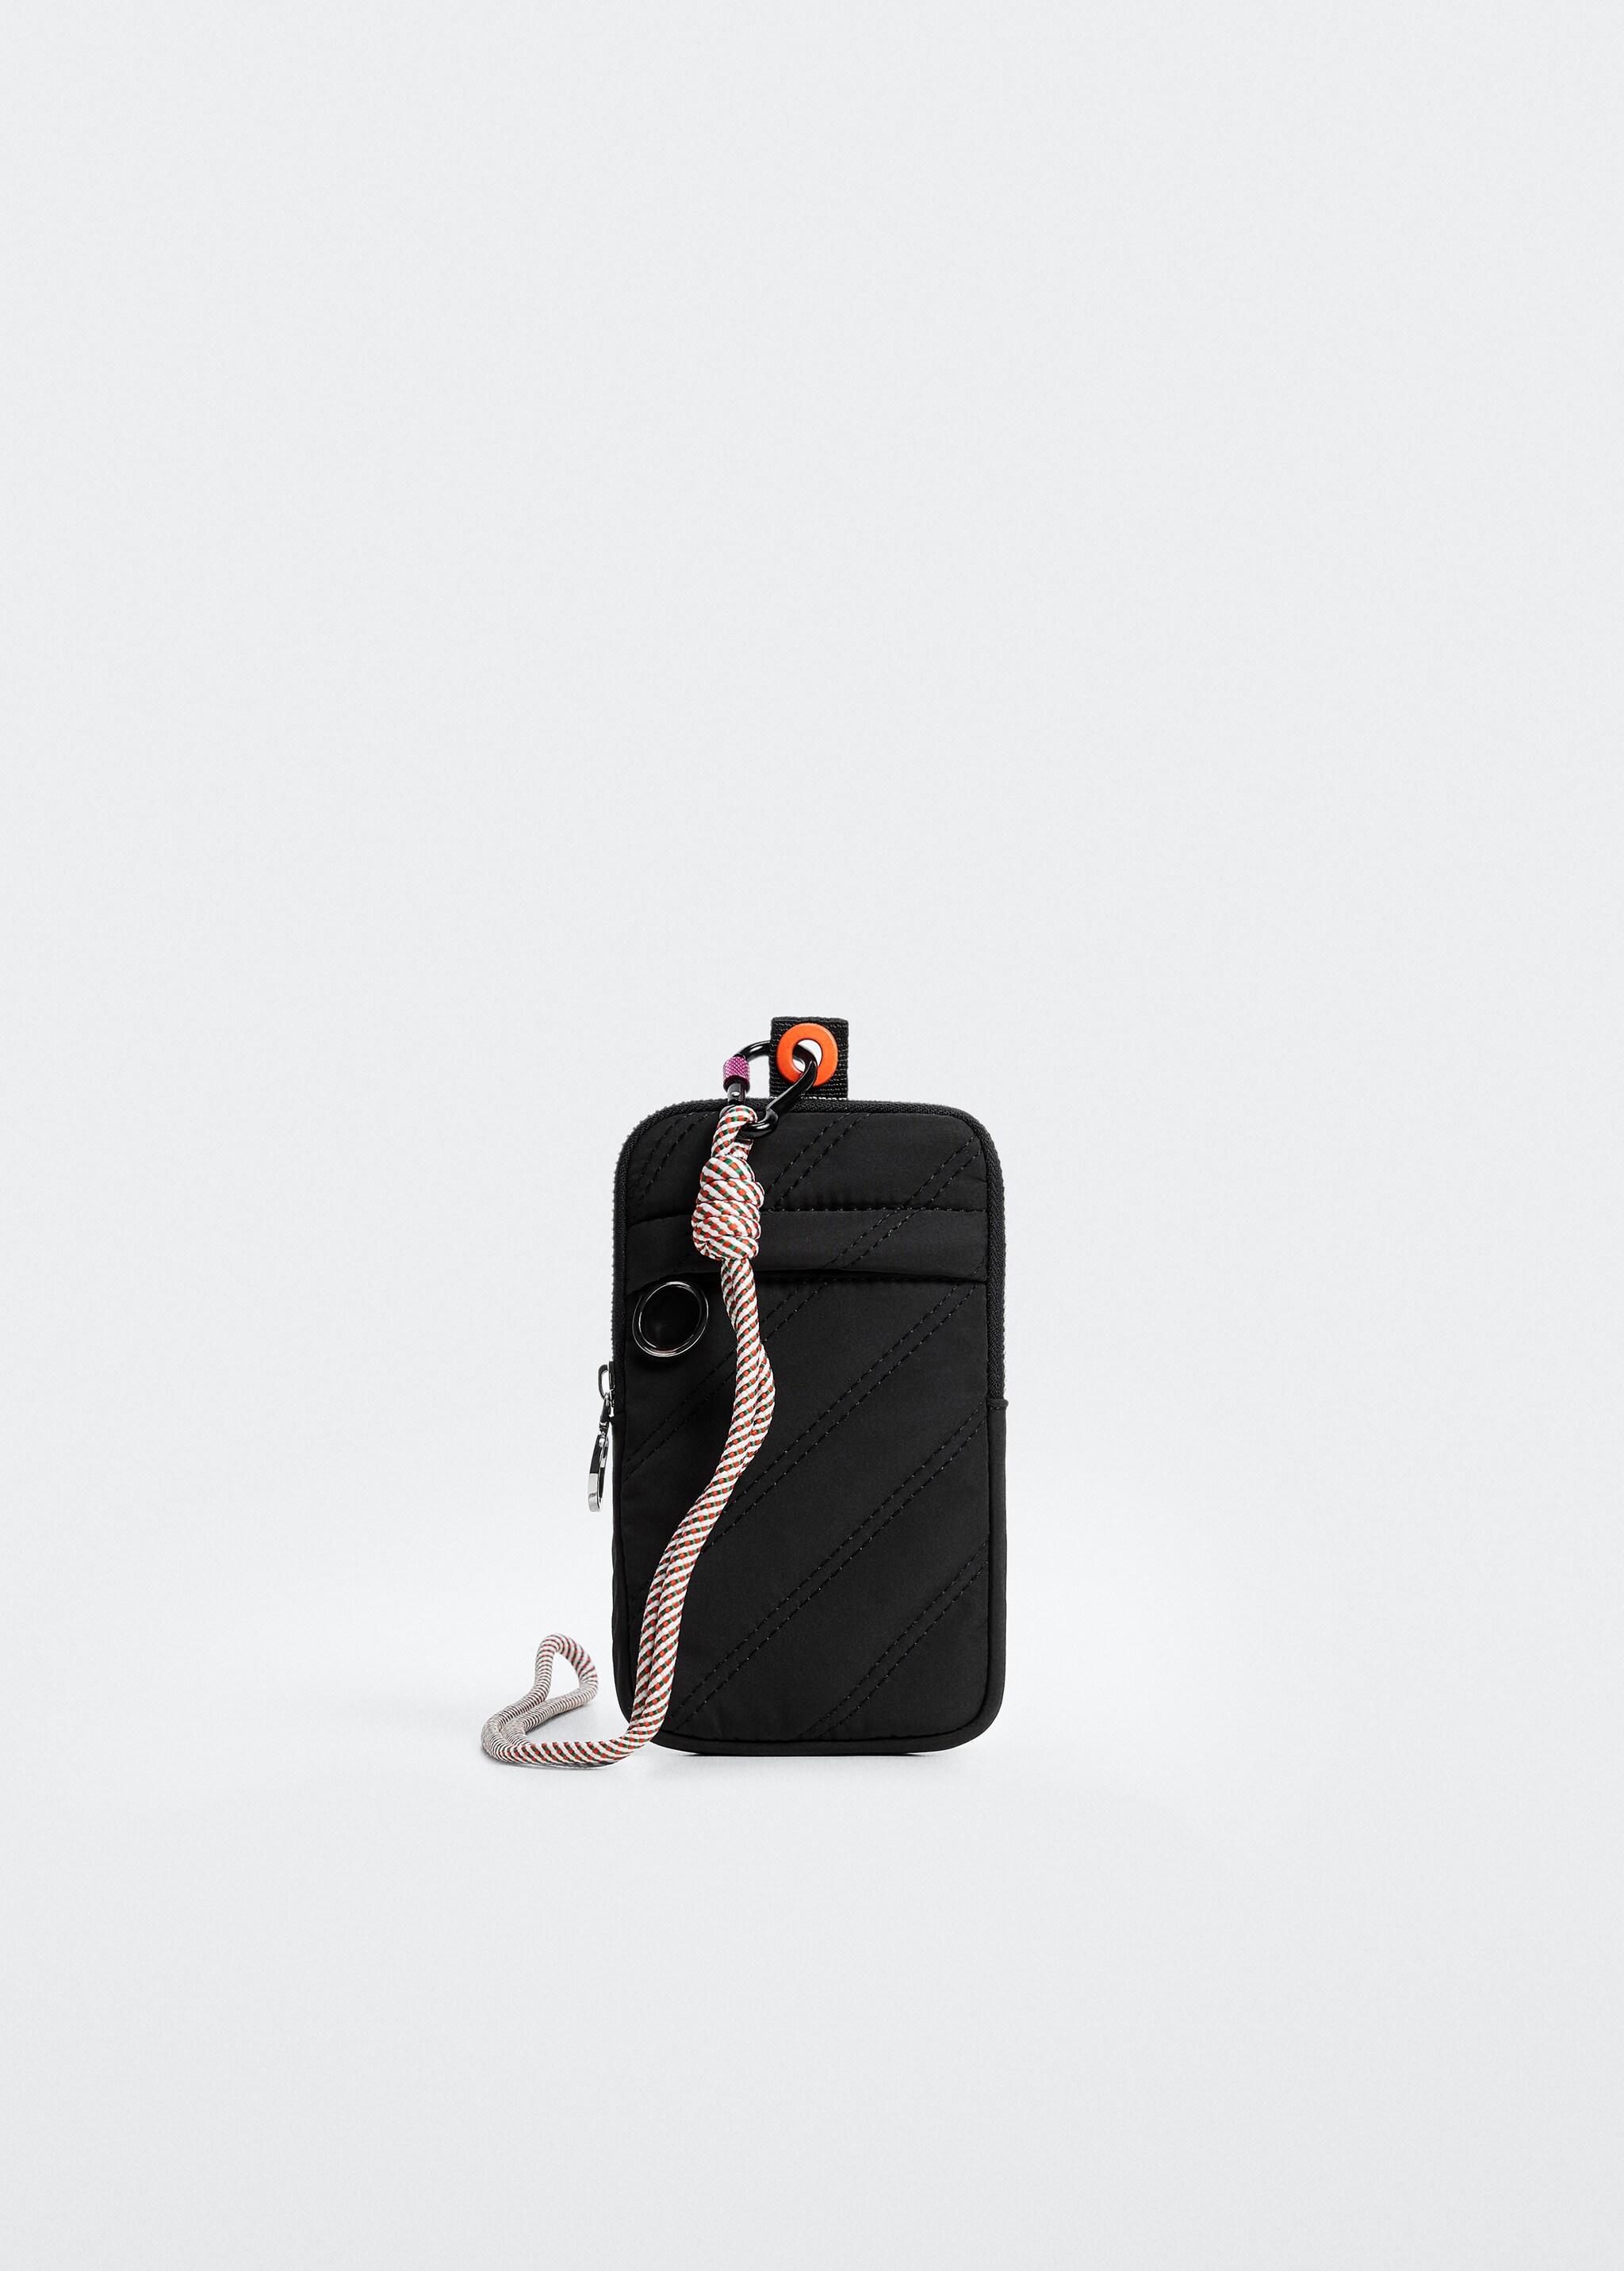 Mobile case with string - Article without model